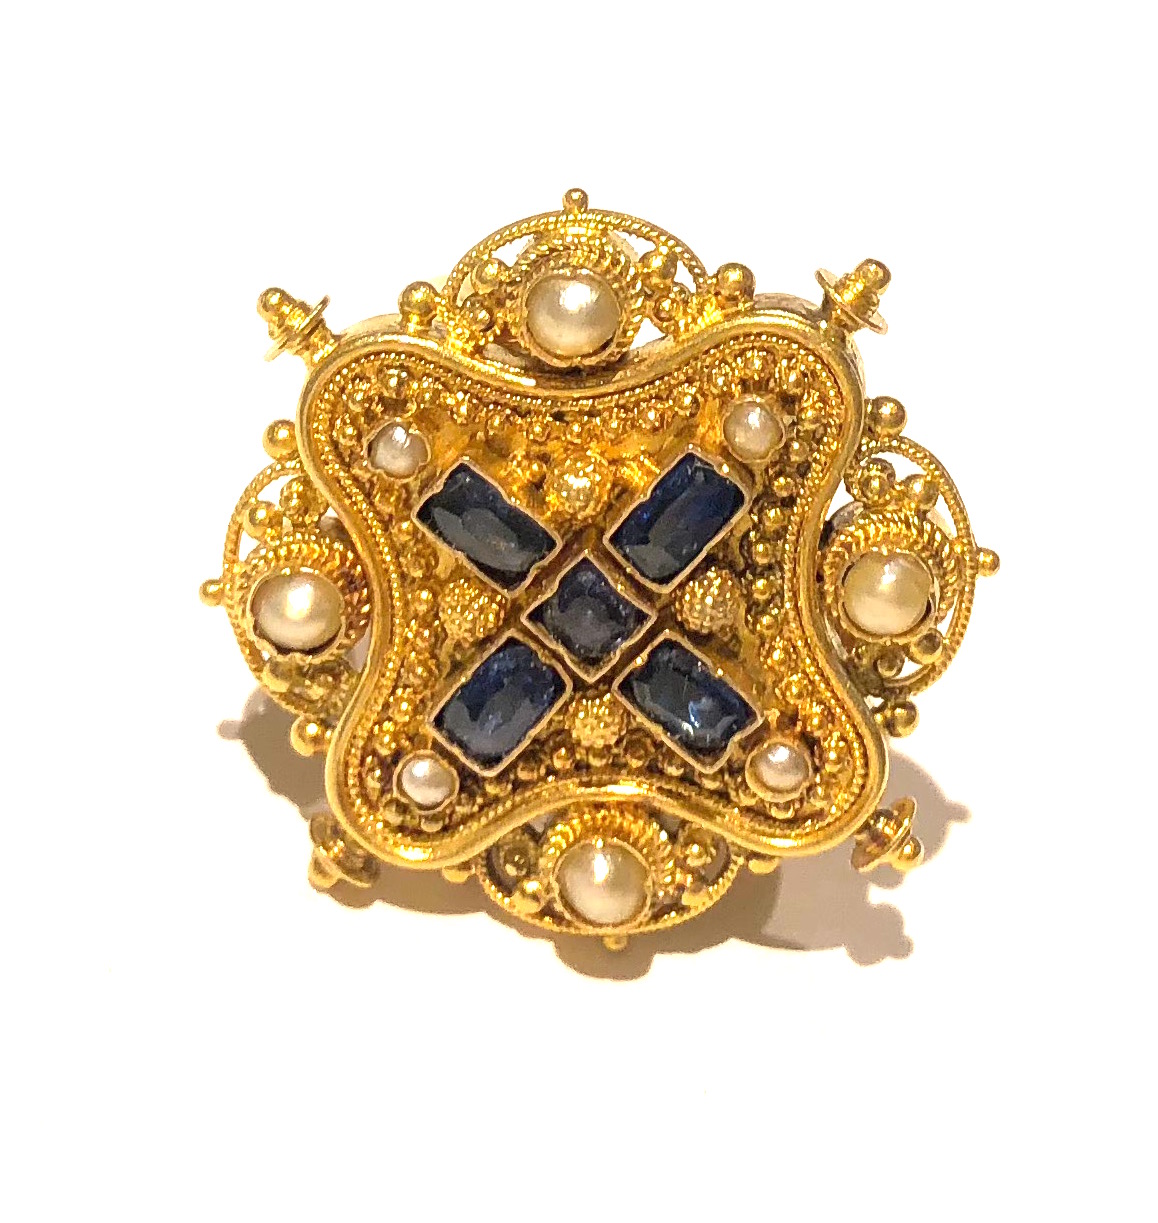 Marchesini, Rome (attr.) Etruscan Revival mid-19th Century elaborate jeweled “Maltese Cross” 18k gold ring set with four rectangular step-cut sapphires and one round-cut sapphire and eight pearls in a highly detailed setting with granulation and twisted gold wire designs, c.1860